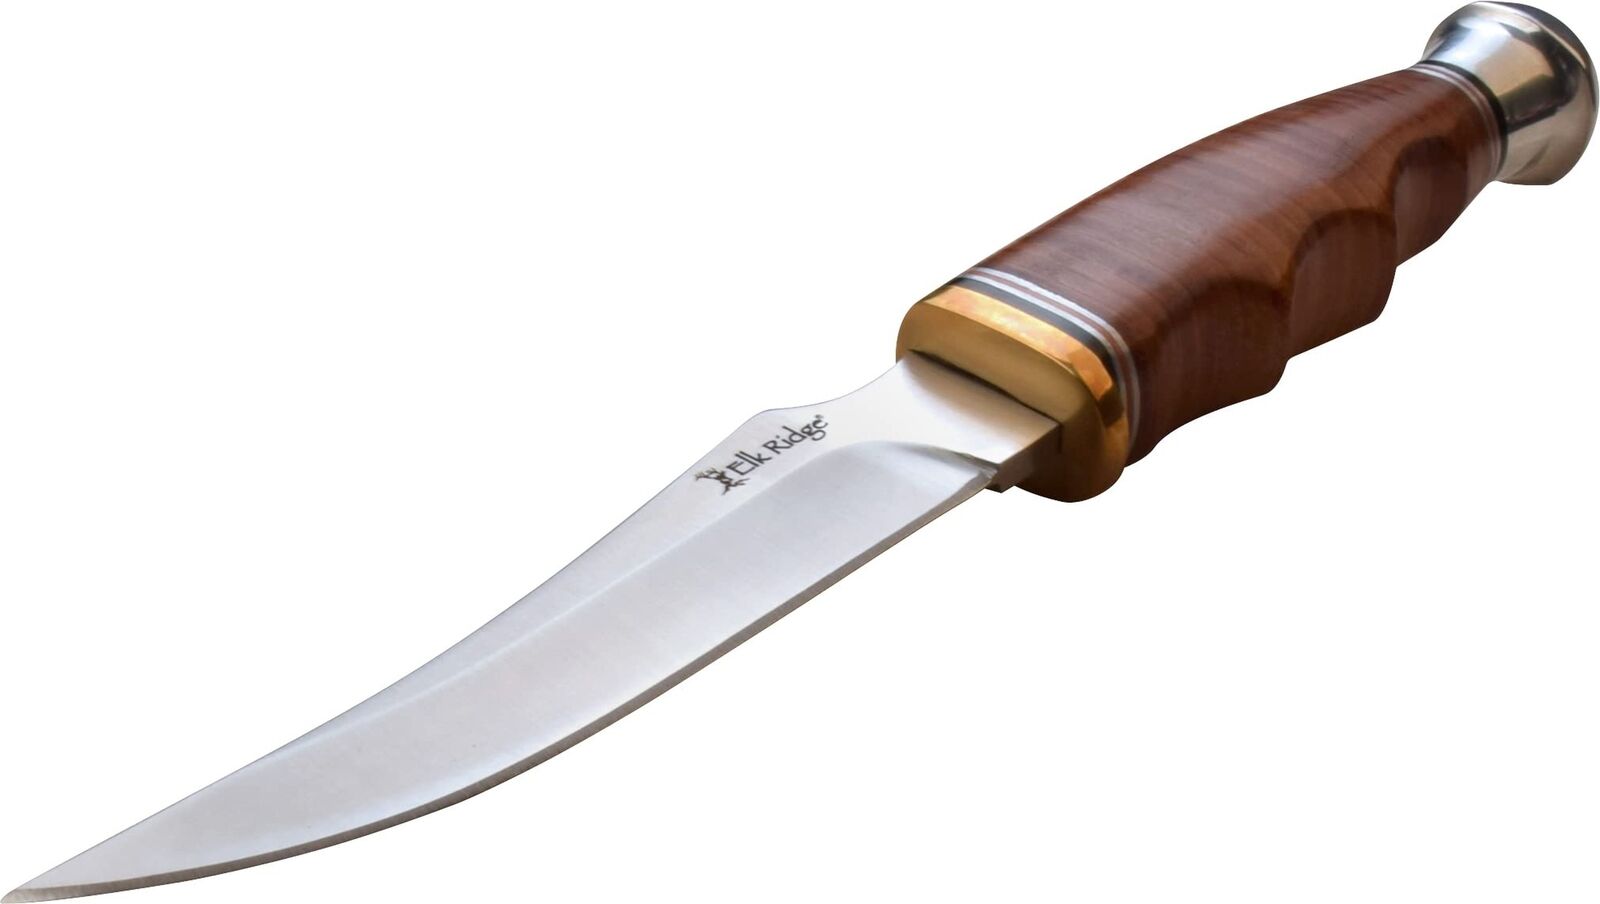 Elk Ridge - Outdoors OUTSKIRT Fixed Blade Knife - 8.25-in Overall, Satin Fini...